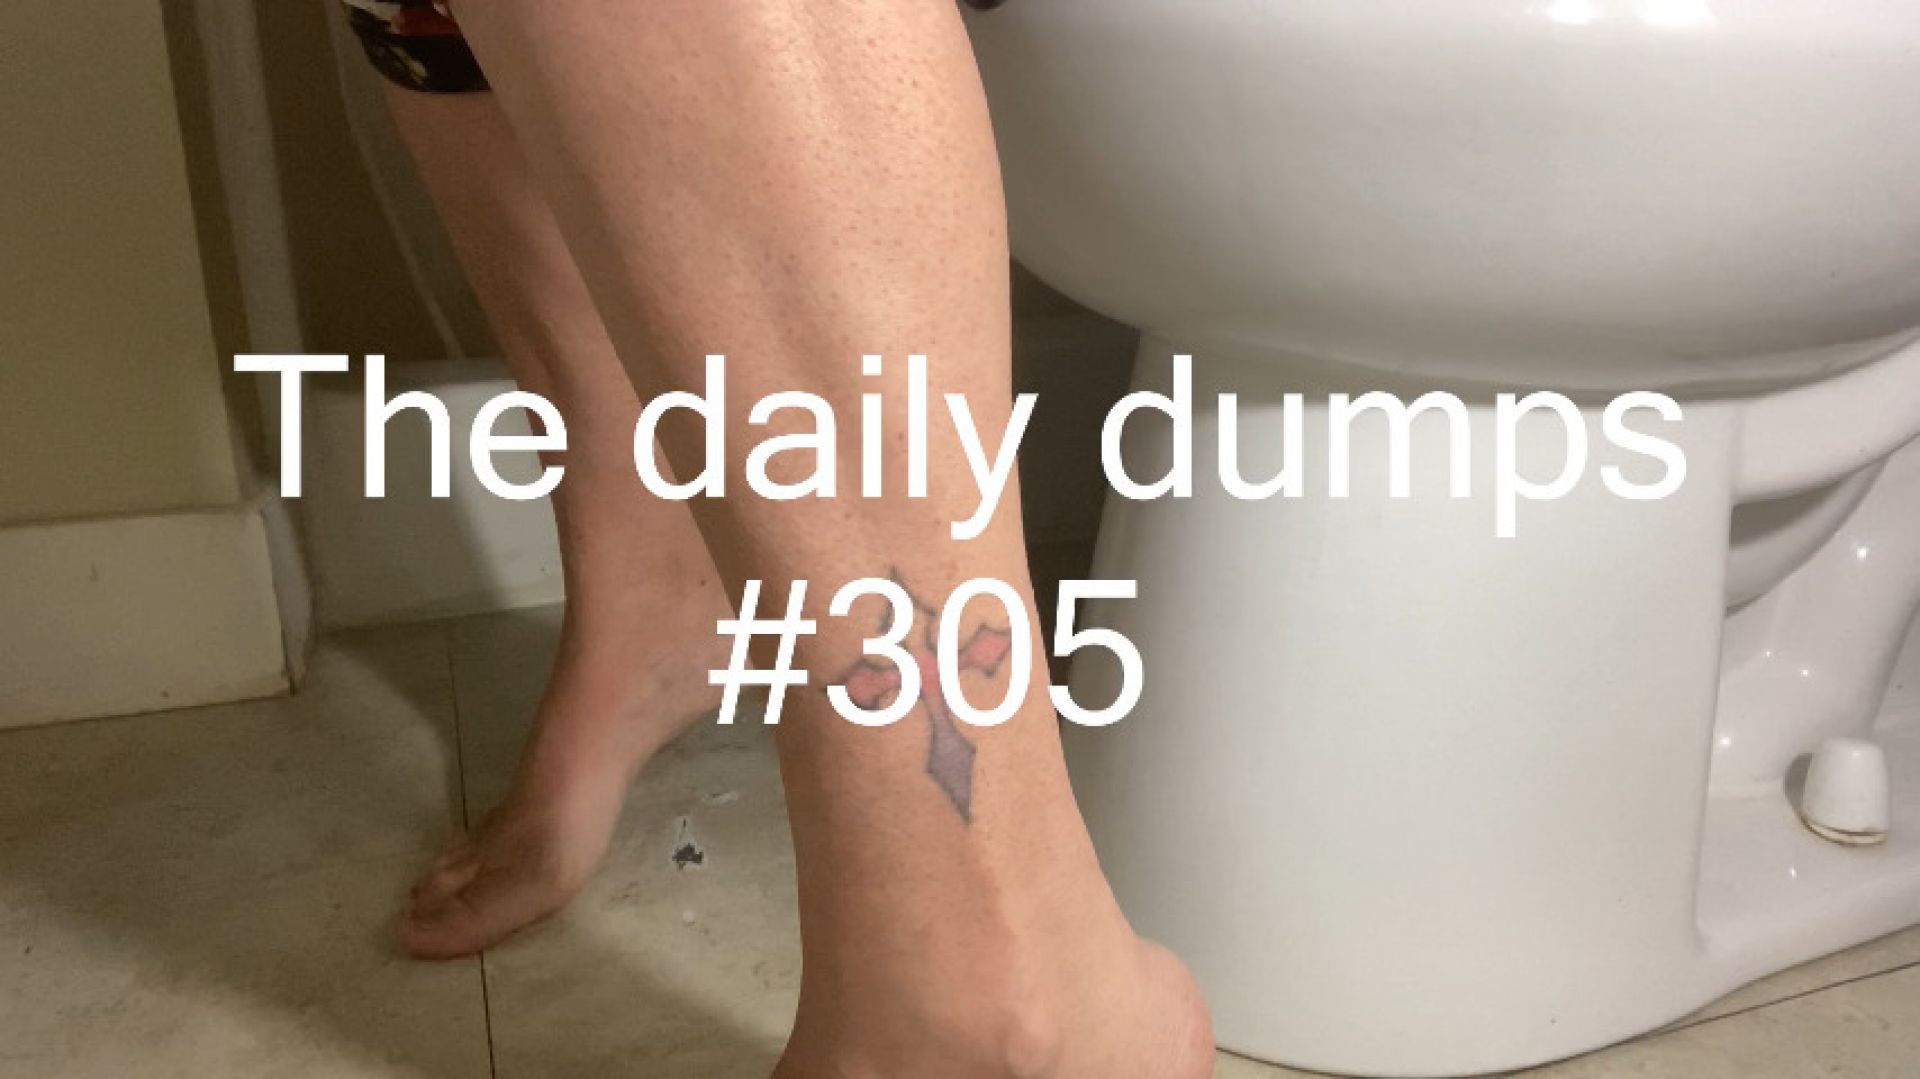 The daily dumps #305